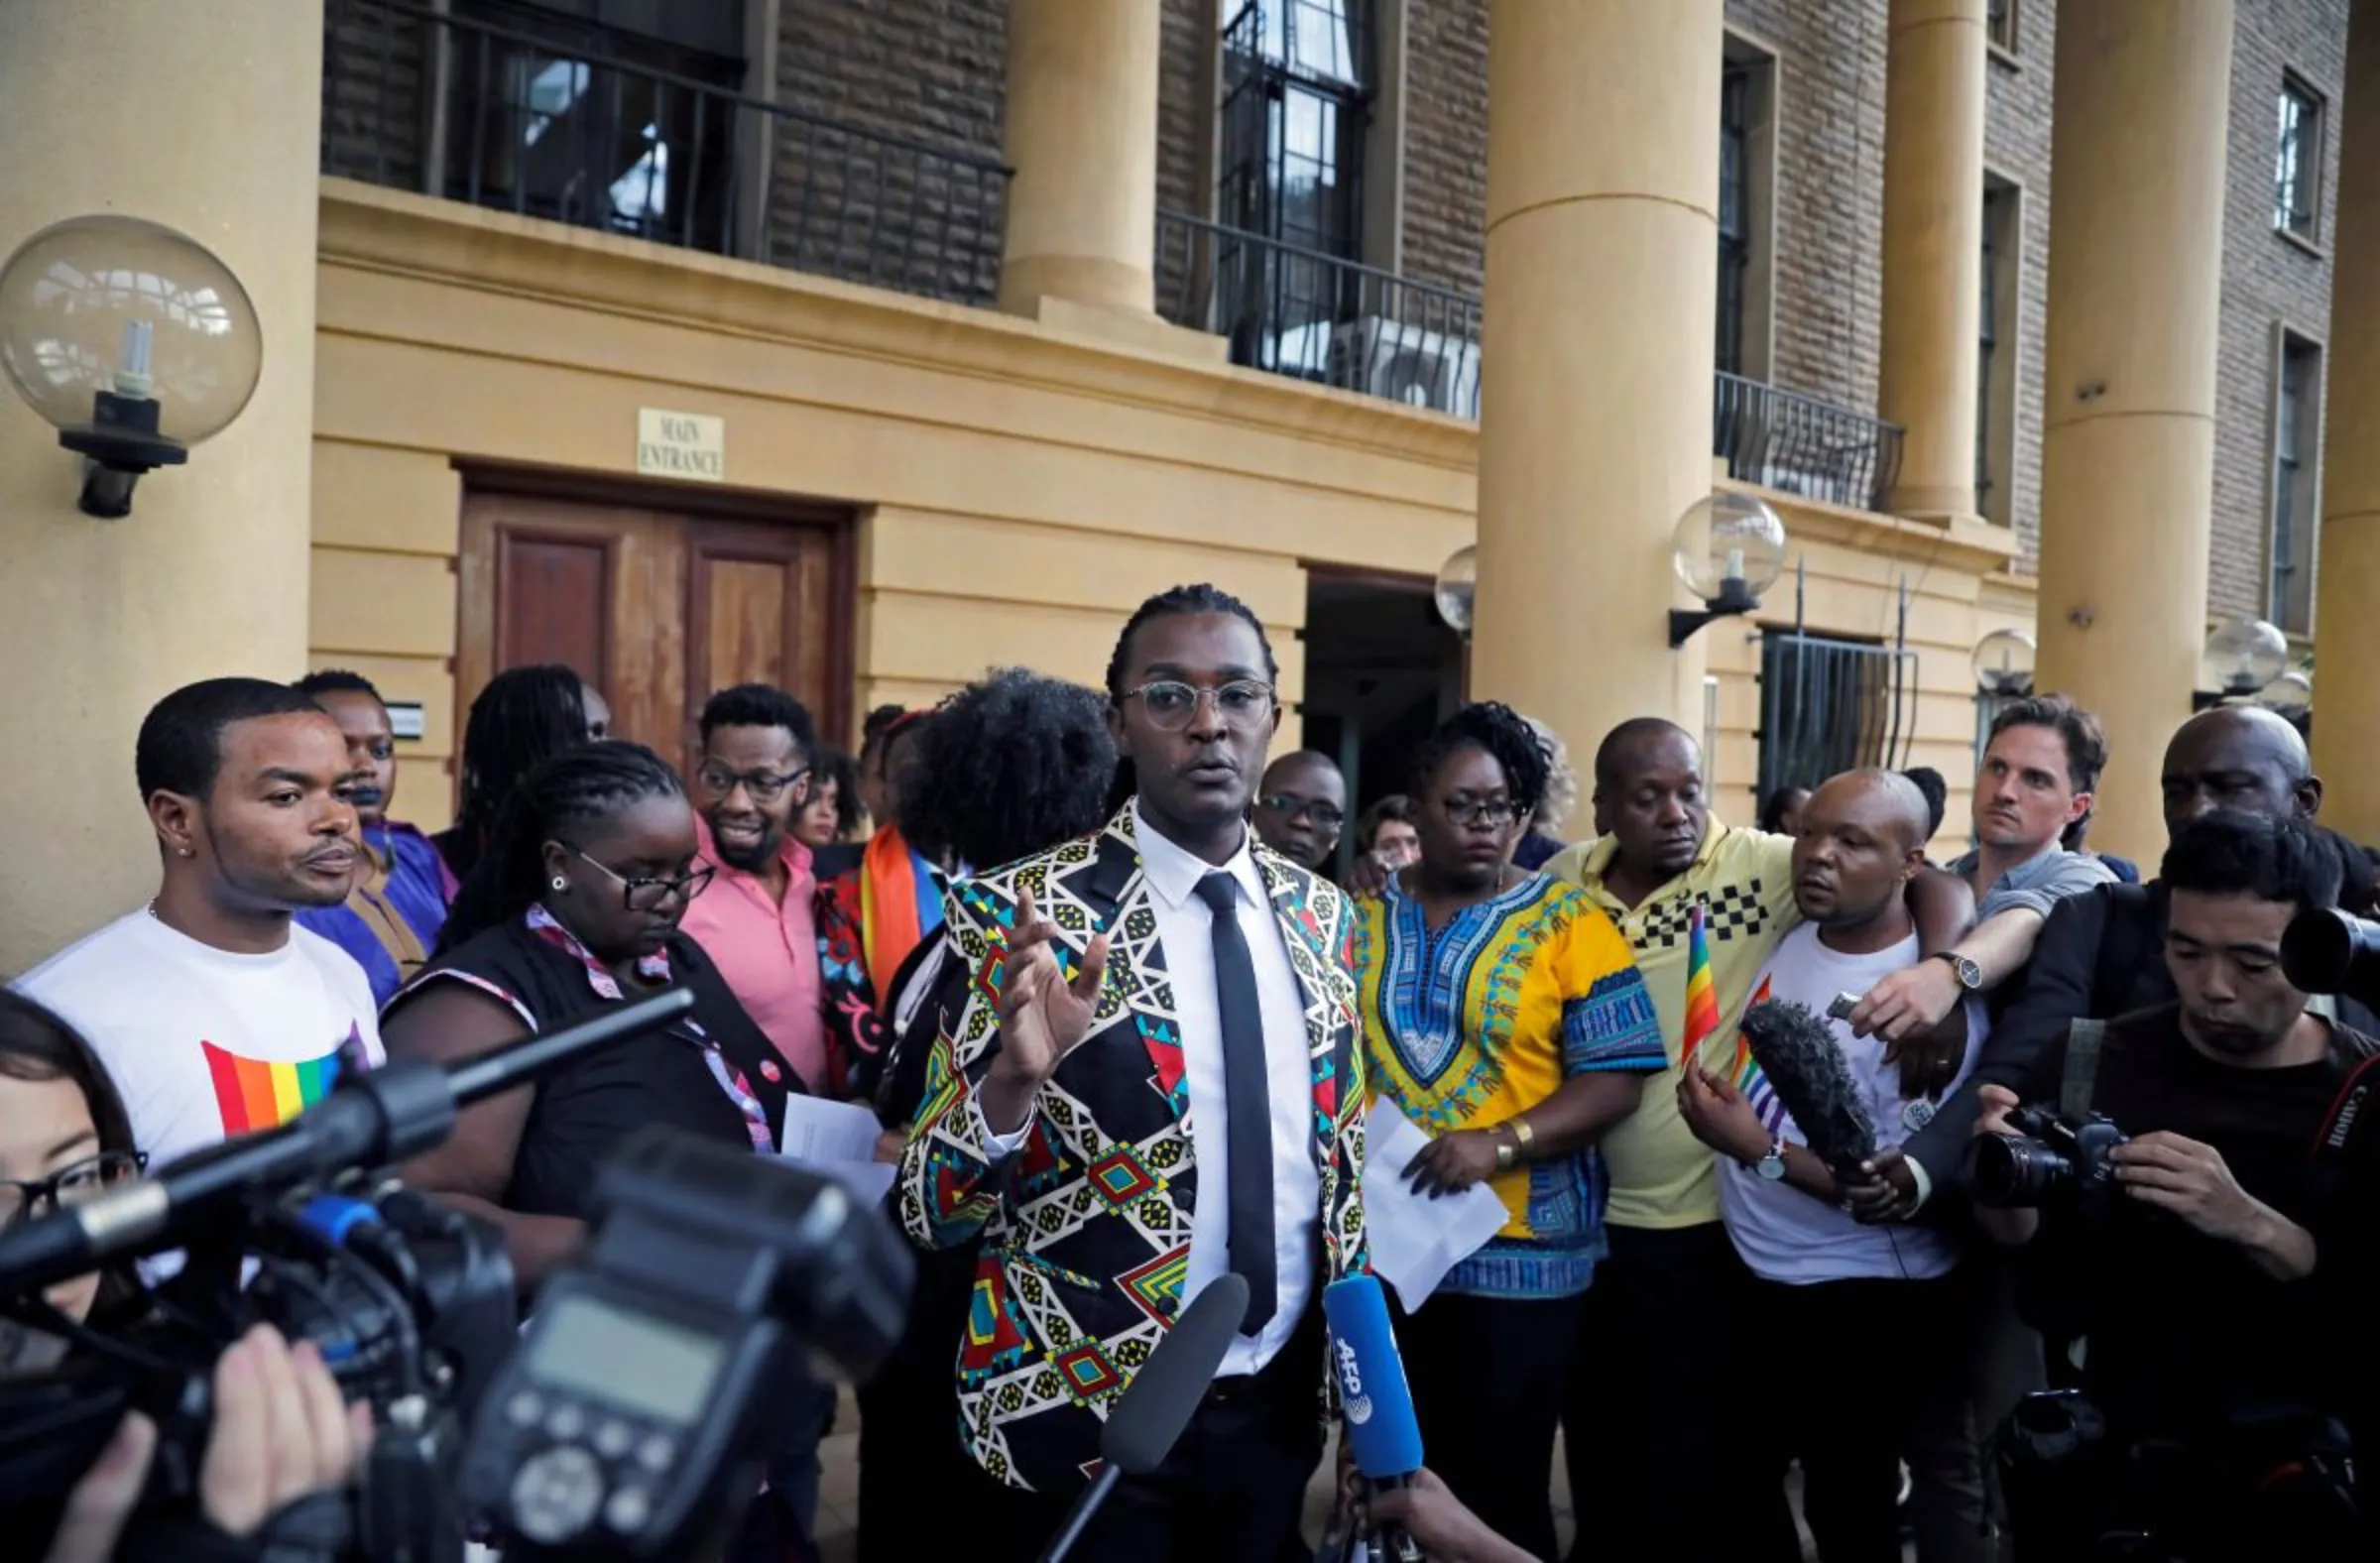 An LGBT activist delivers a statement after a ruling by Kenya's high court to upheld a law banning gay sex in Nairobi, Kenya May 24, 2019. REUTERS/Baz Ratner